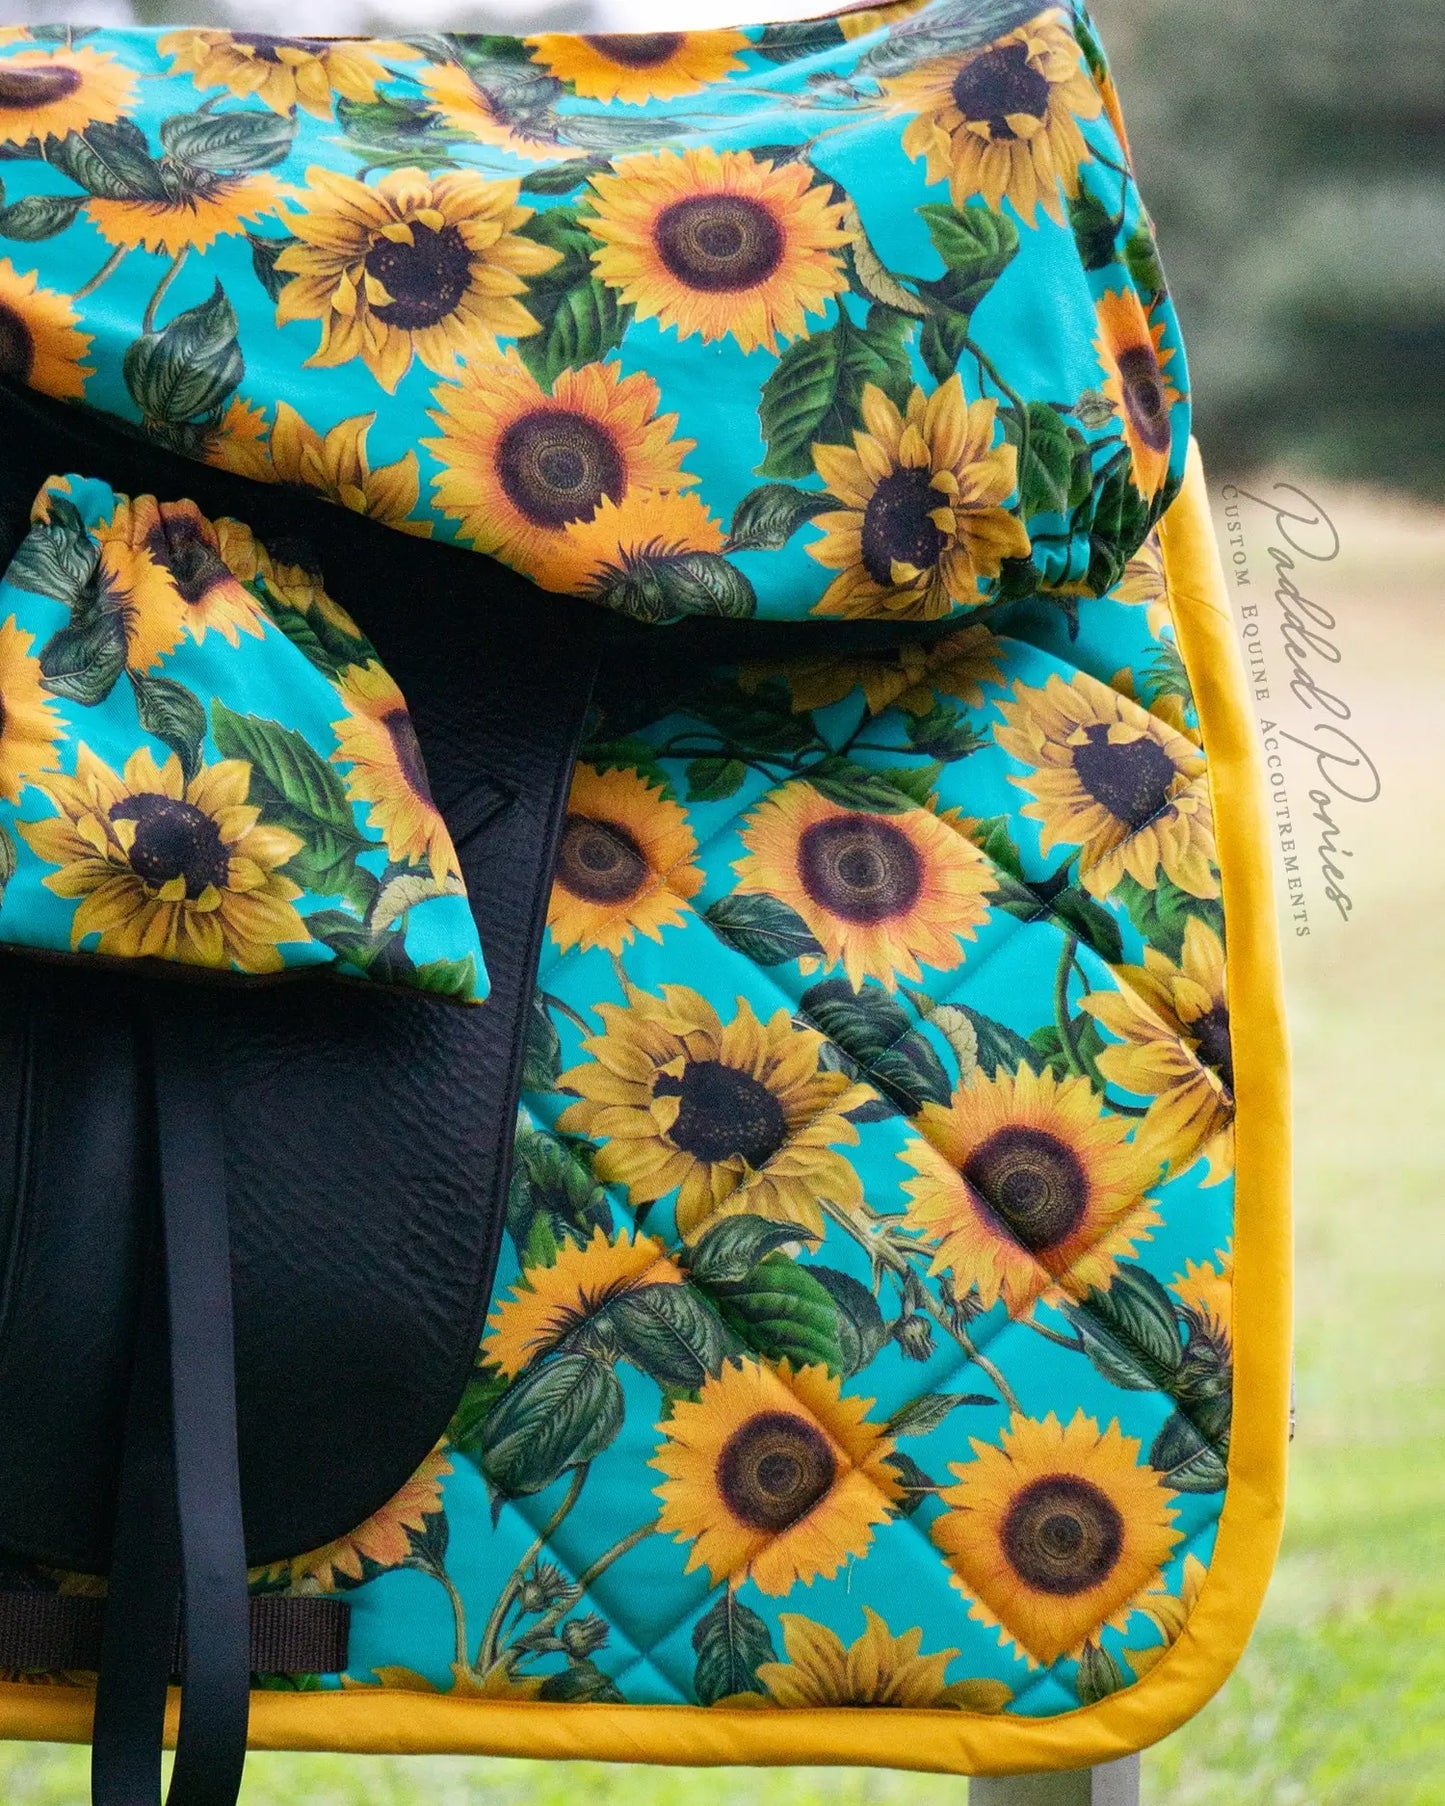 Turquoise Teal Aqua Yellow Sunflowers Floral Dressage Saddle Cover Matching Set